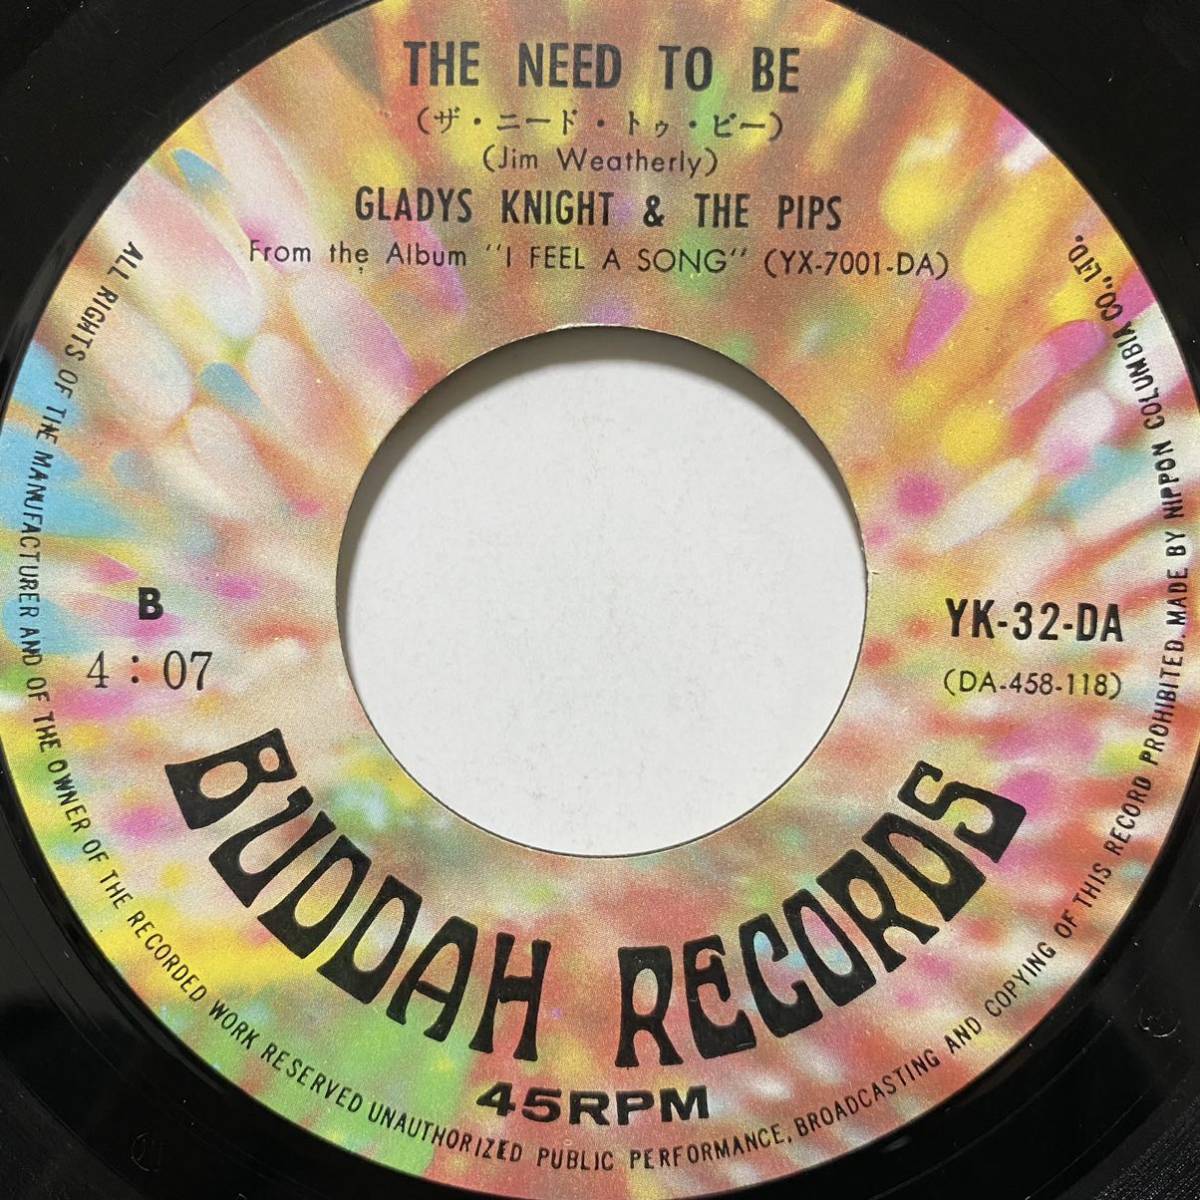 GLADYS KNIGHT & THE PIPS THE WAY WE WERE TRY TO REMEMBER 追憶 THE NEED TO BE 7inch 7インチ EP 国内盤 WU TANG CLAN LAURYN HILL ネタ_画像3